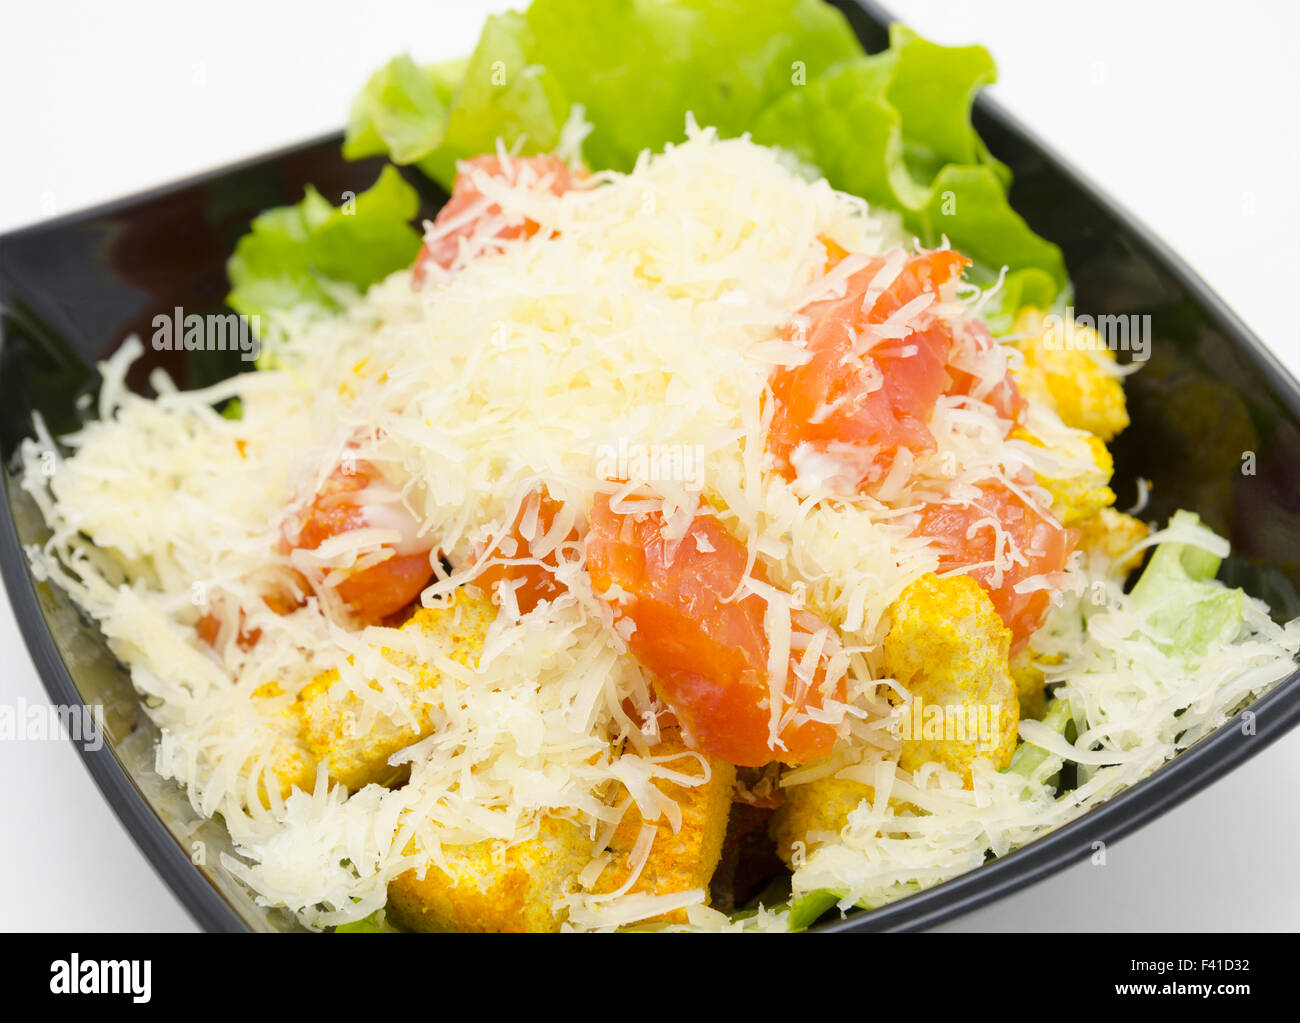 caesar salad covered with grated cheese Stock Photo